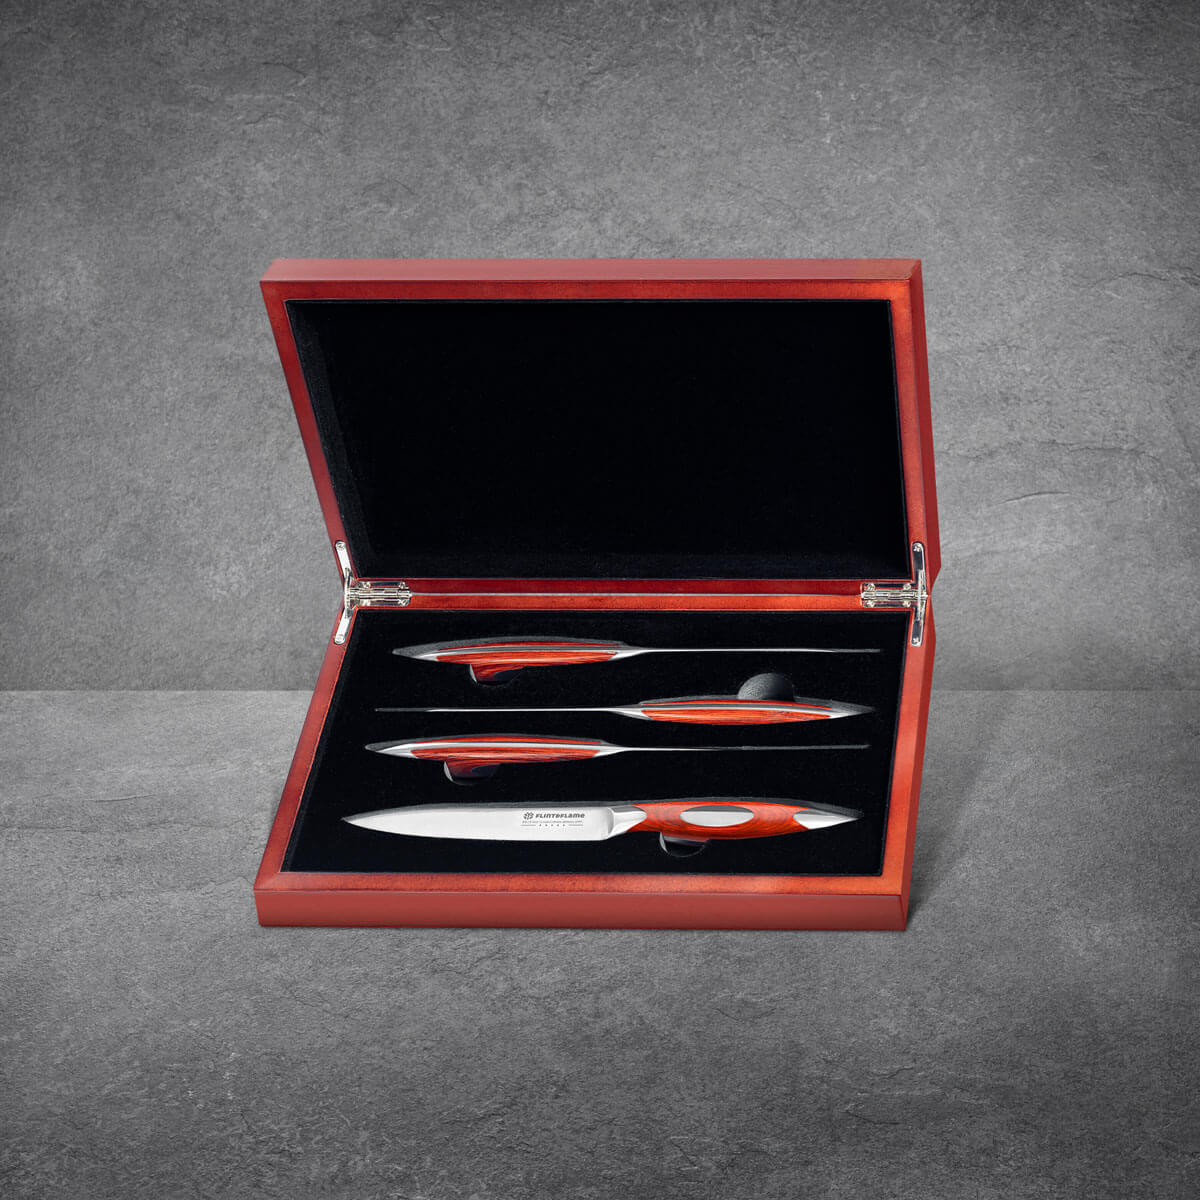 Flint and Flame 4 piece Steak Knife set in Wooden box - 1002705 - The Cotswold Knife Company